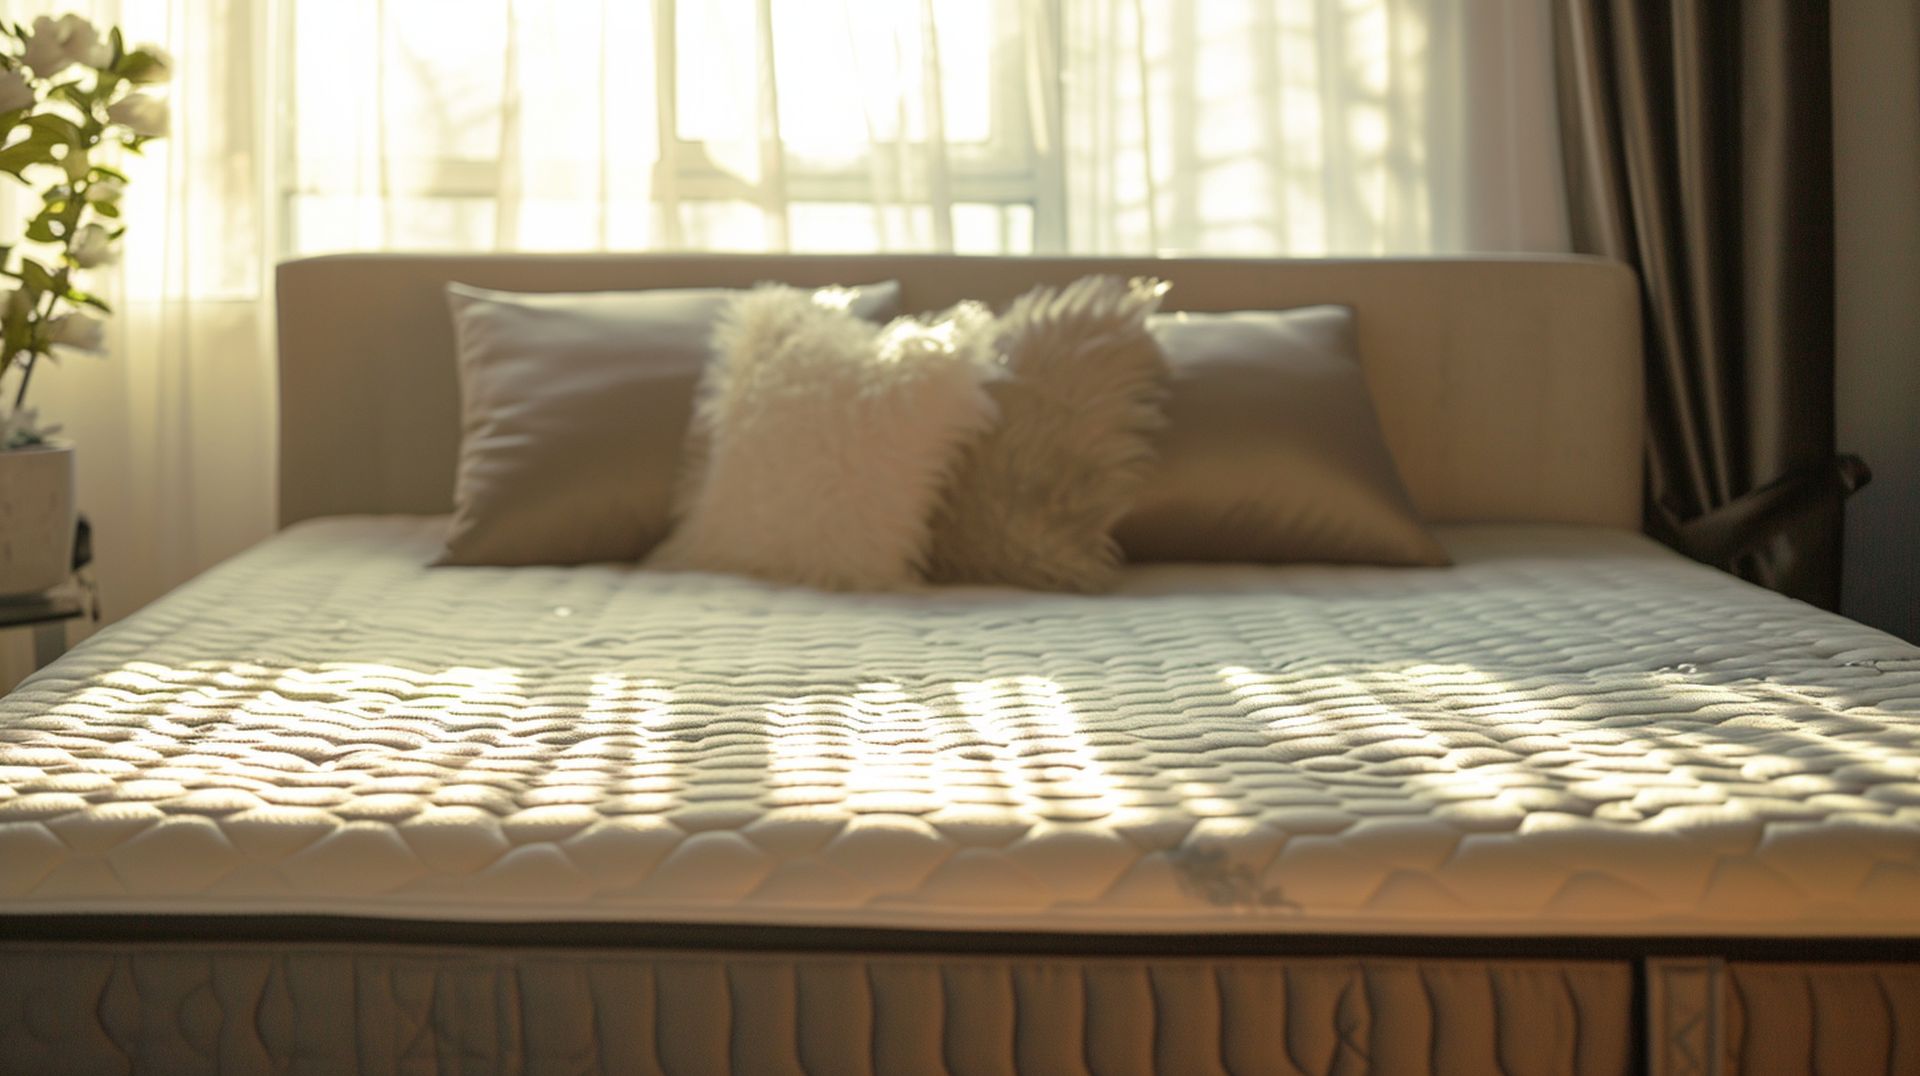 Types of mattresses at mattress dealers in Tracy, CA